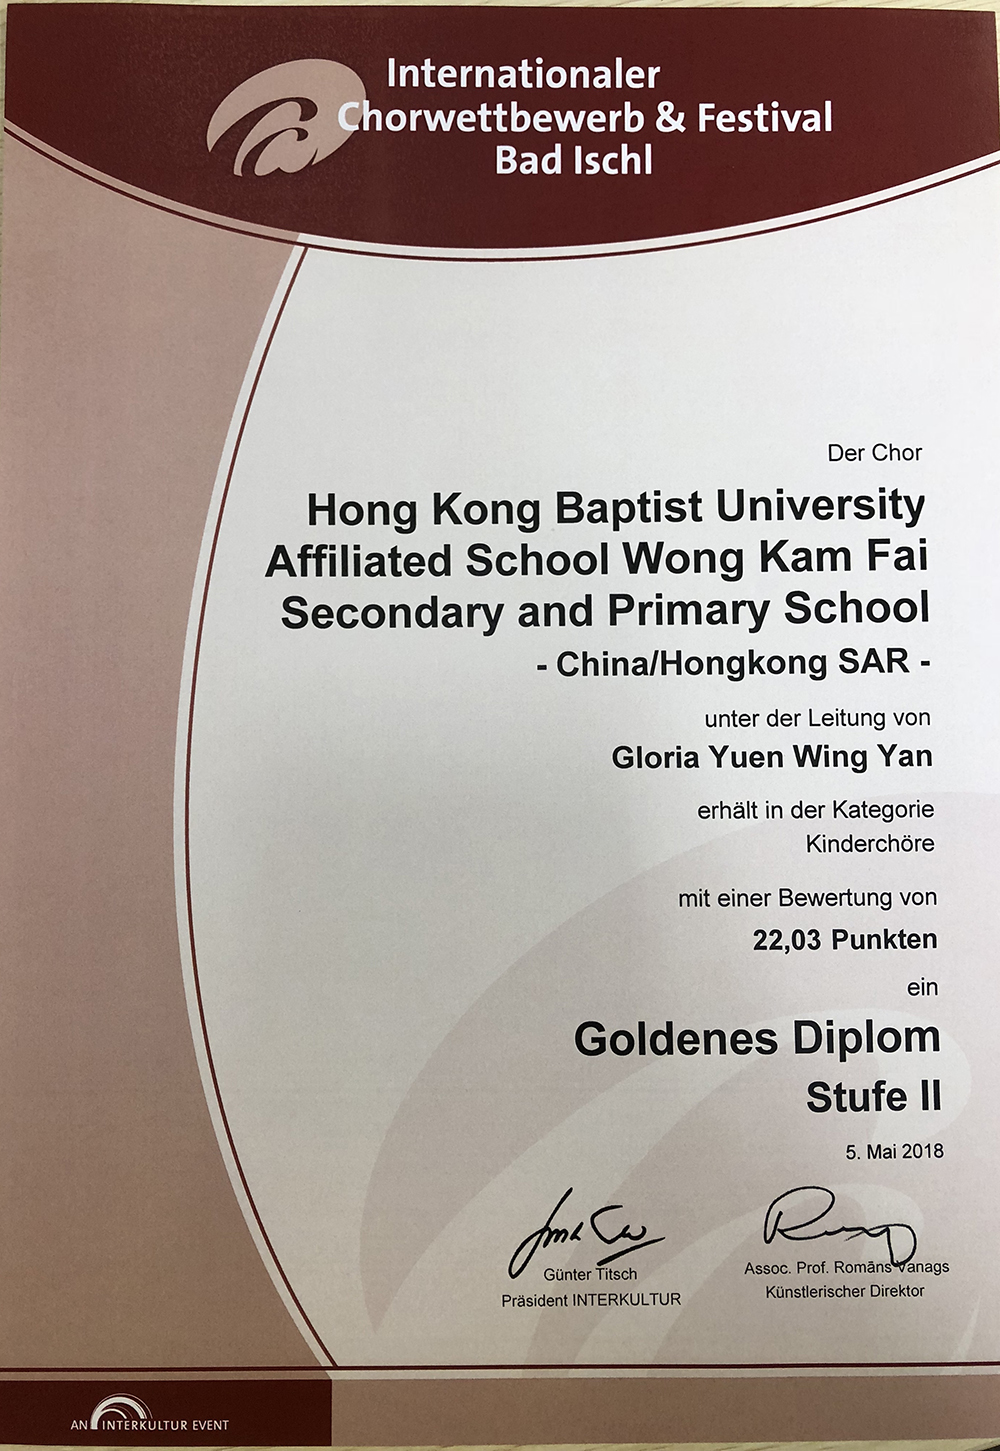 The Concert Choir won the Gold Award in the category of Children’s Choirs.